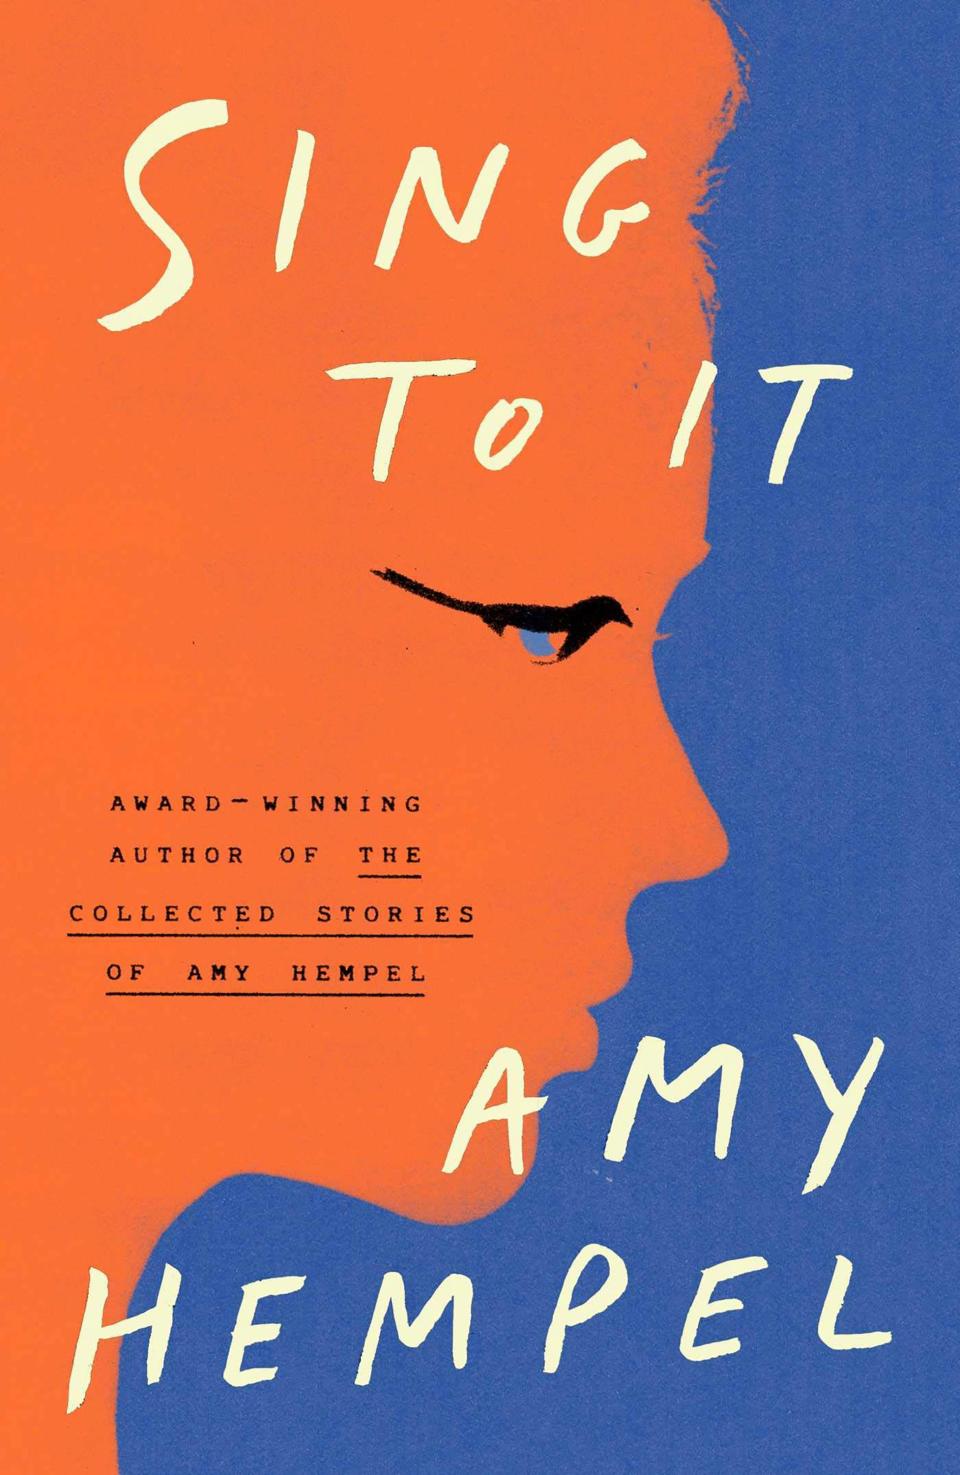 New additions for your reading list from Amy Hempel and Kristen Roupenian to Oprah Winfrey and Toni Morrison.